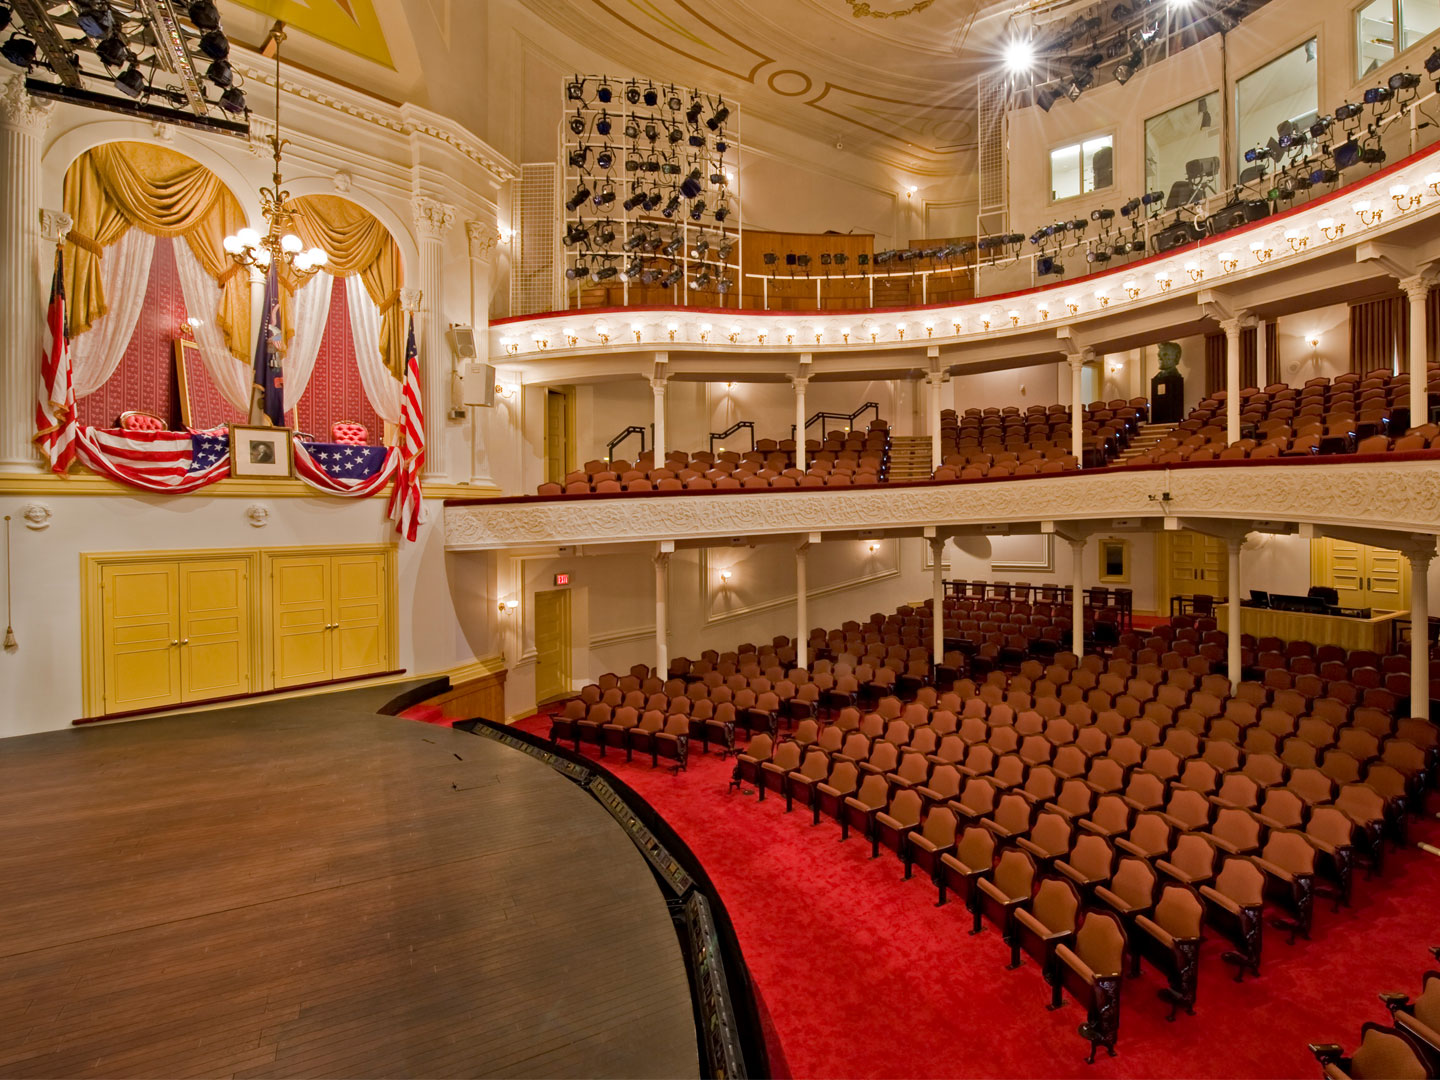 A side view of the stage and seating at Ford’s Theatre. On the left is the President Box with an American flag, a framed picture of George Washington and American flag bunting draped over the box.